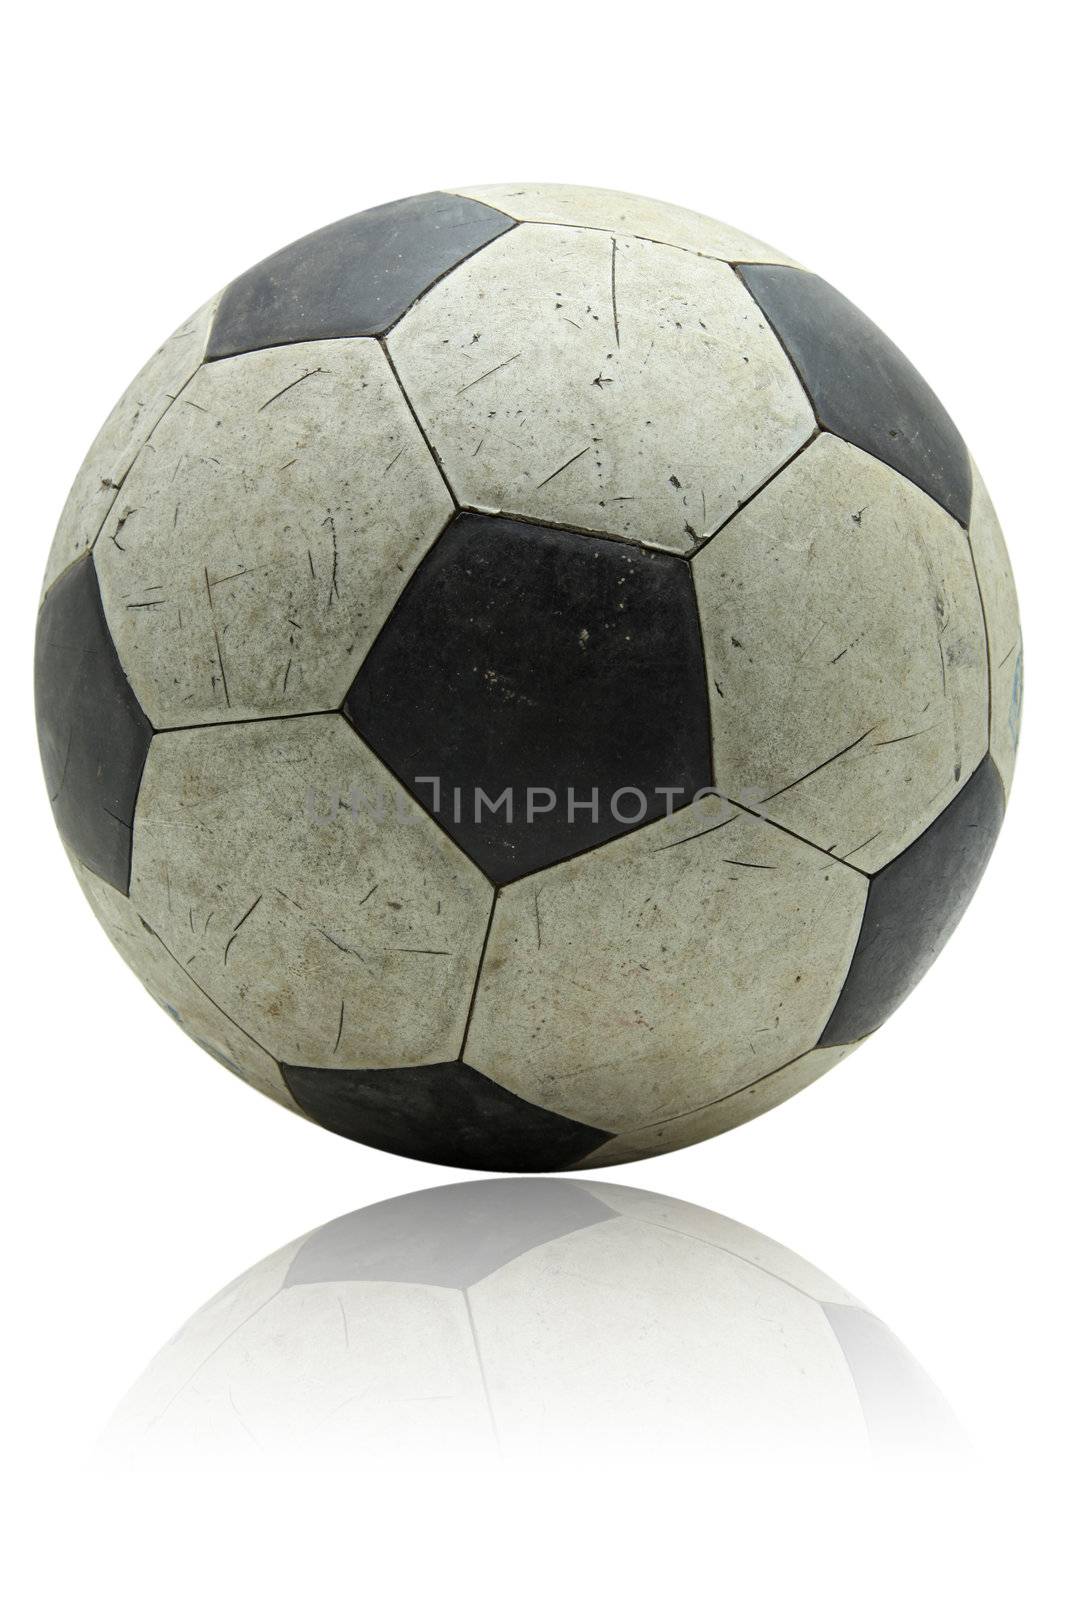 grunge soccer football with its reflection on white